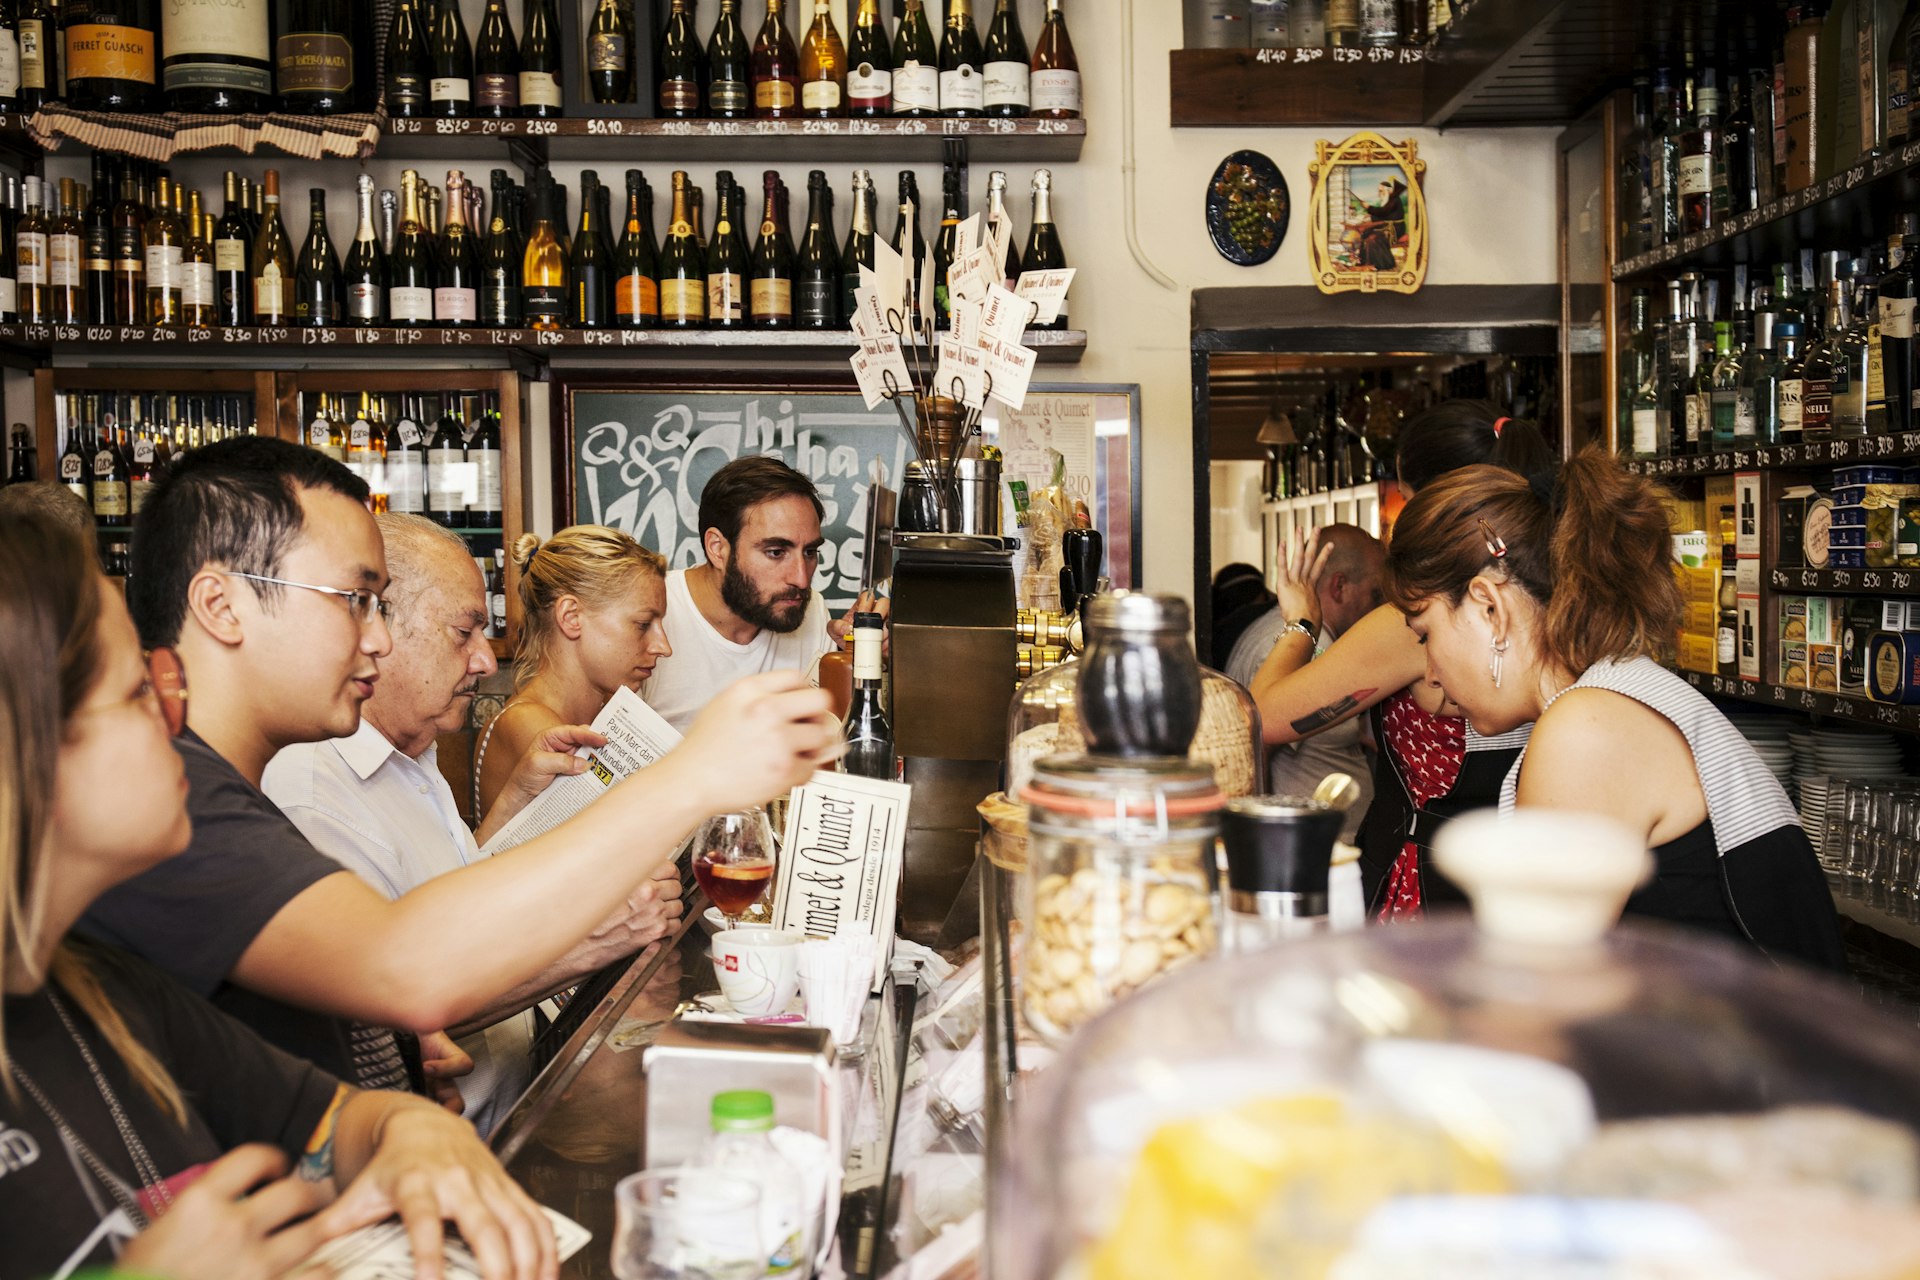 People eating and drinking at a bar in Barcelona